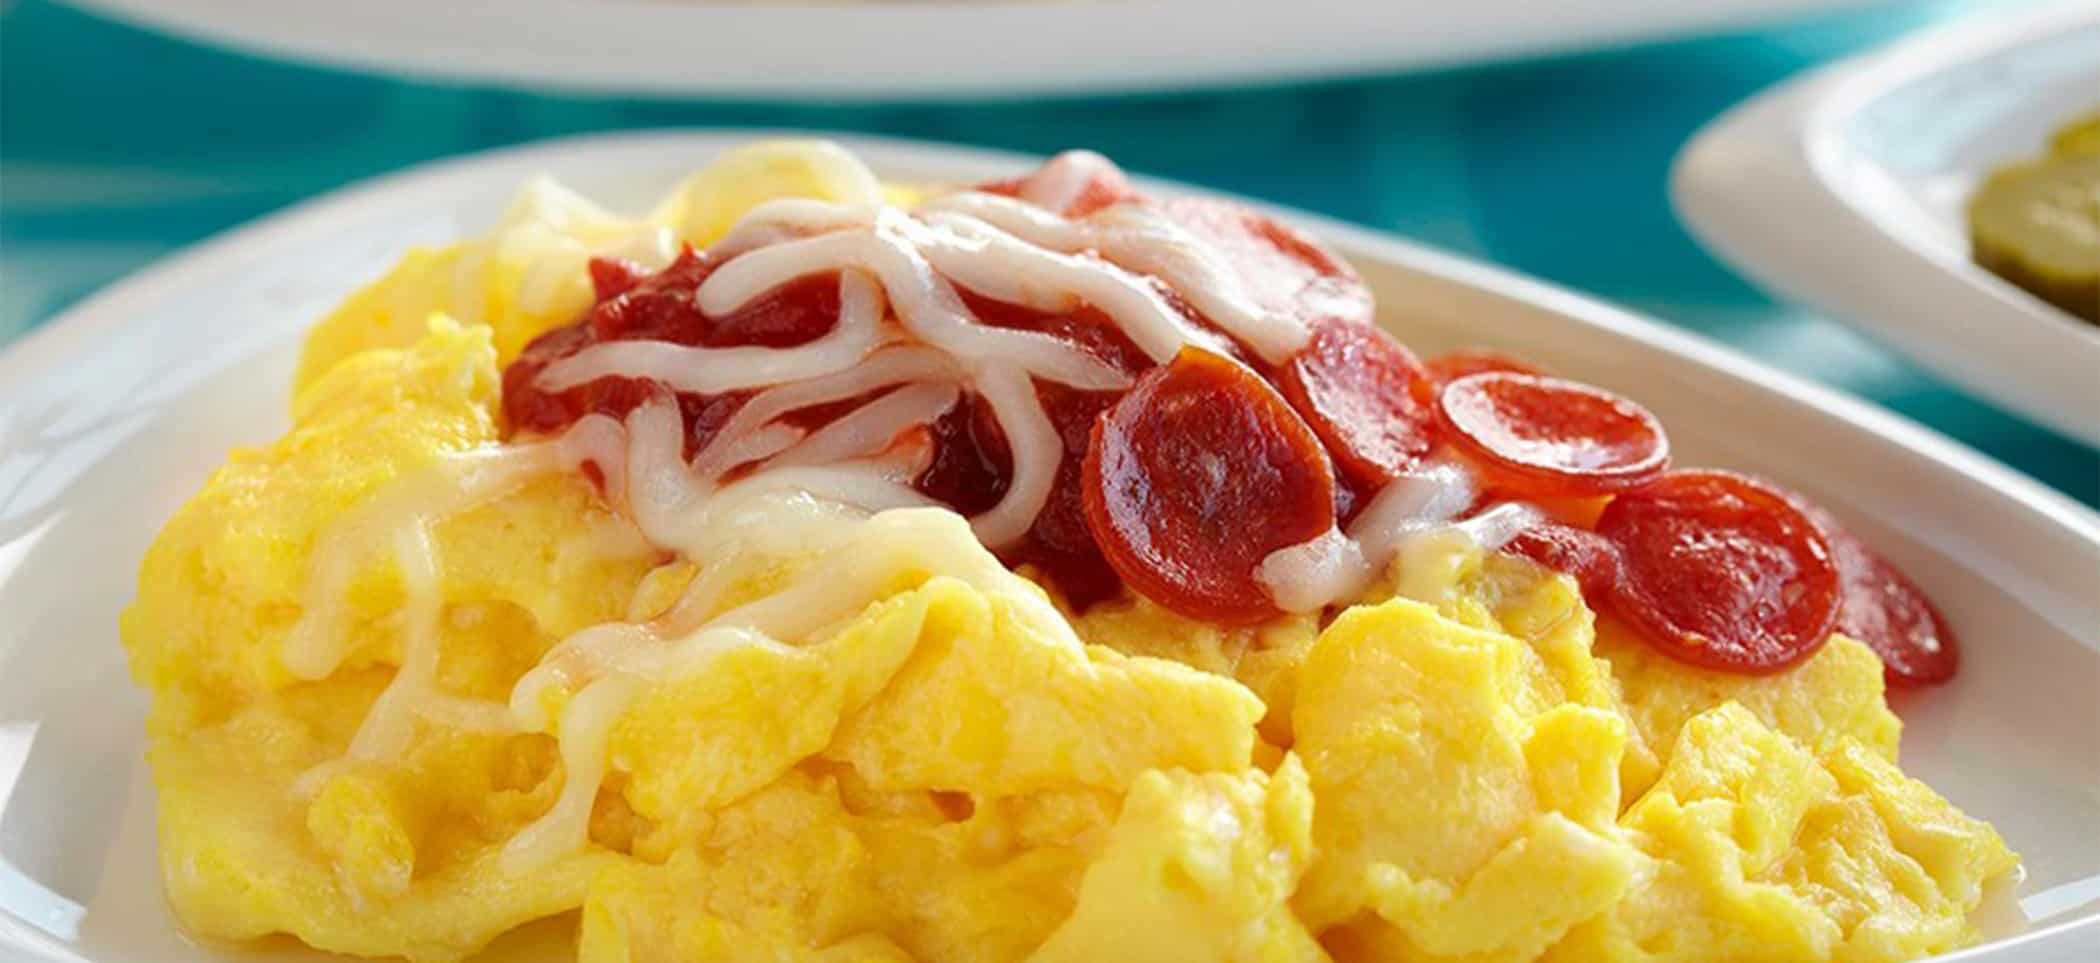 Pizza-Topped Scrambled Eggs